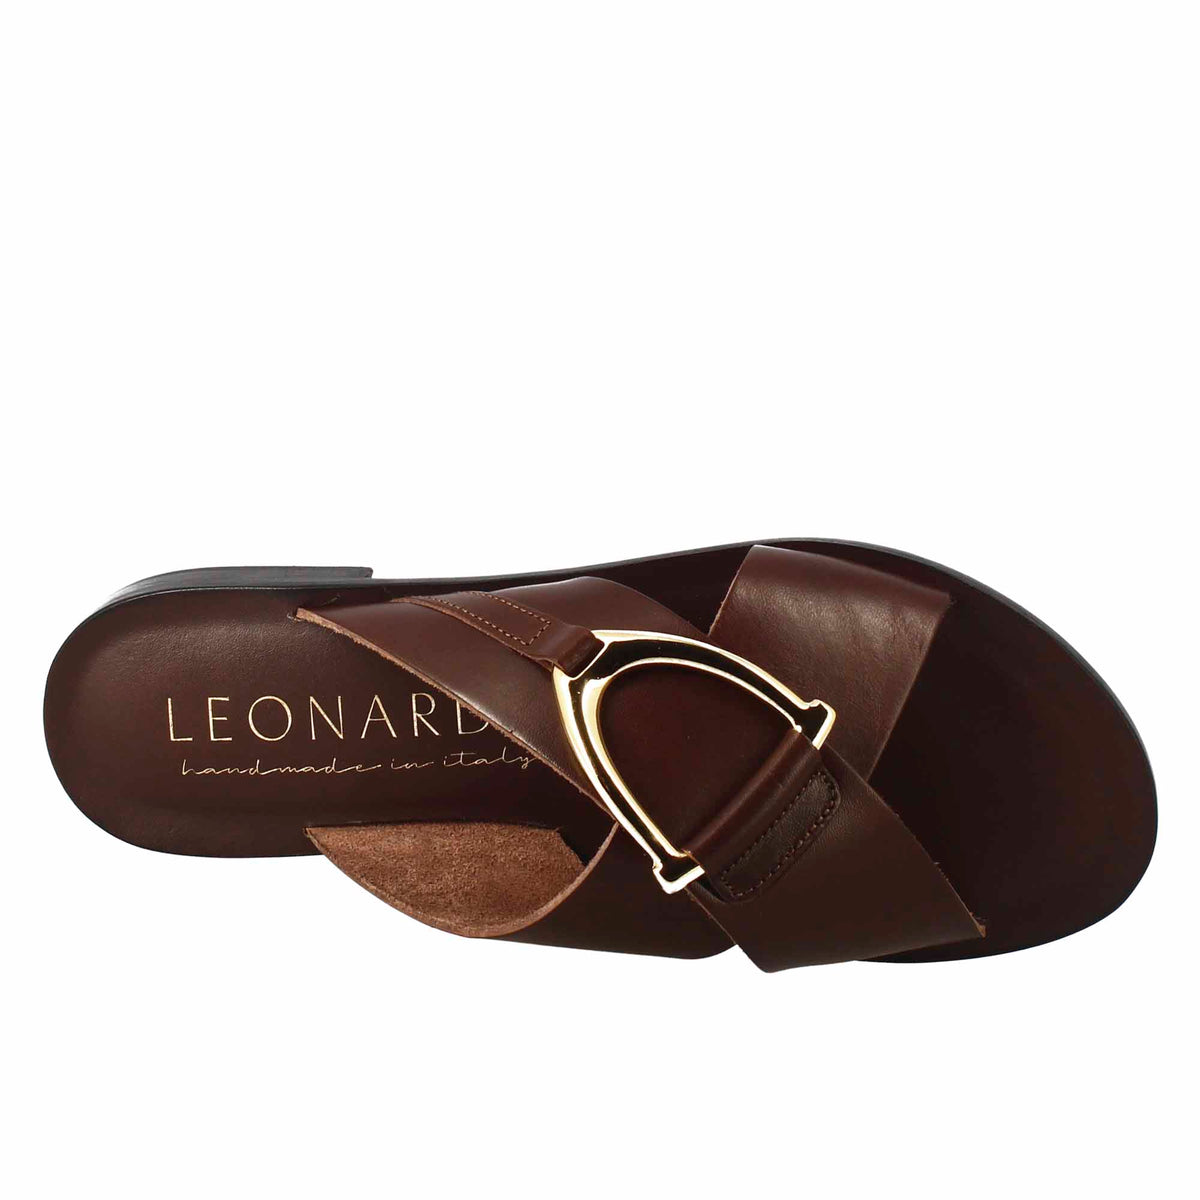 Women's handmade flat slipper sandals in tan leather with golden buckle